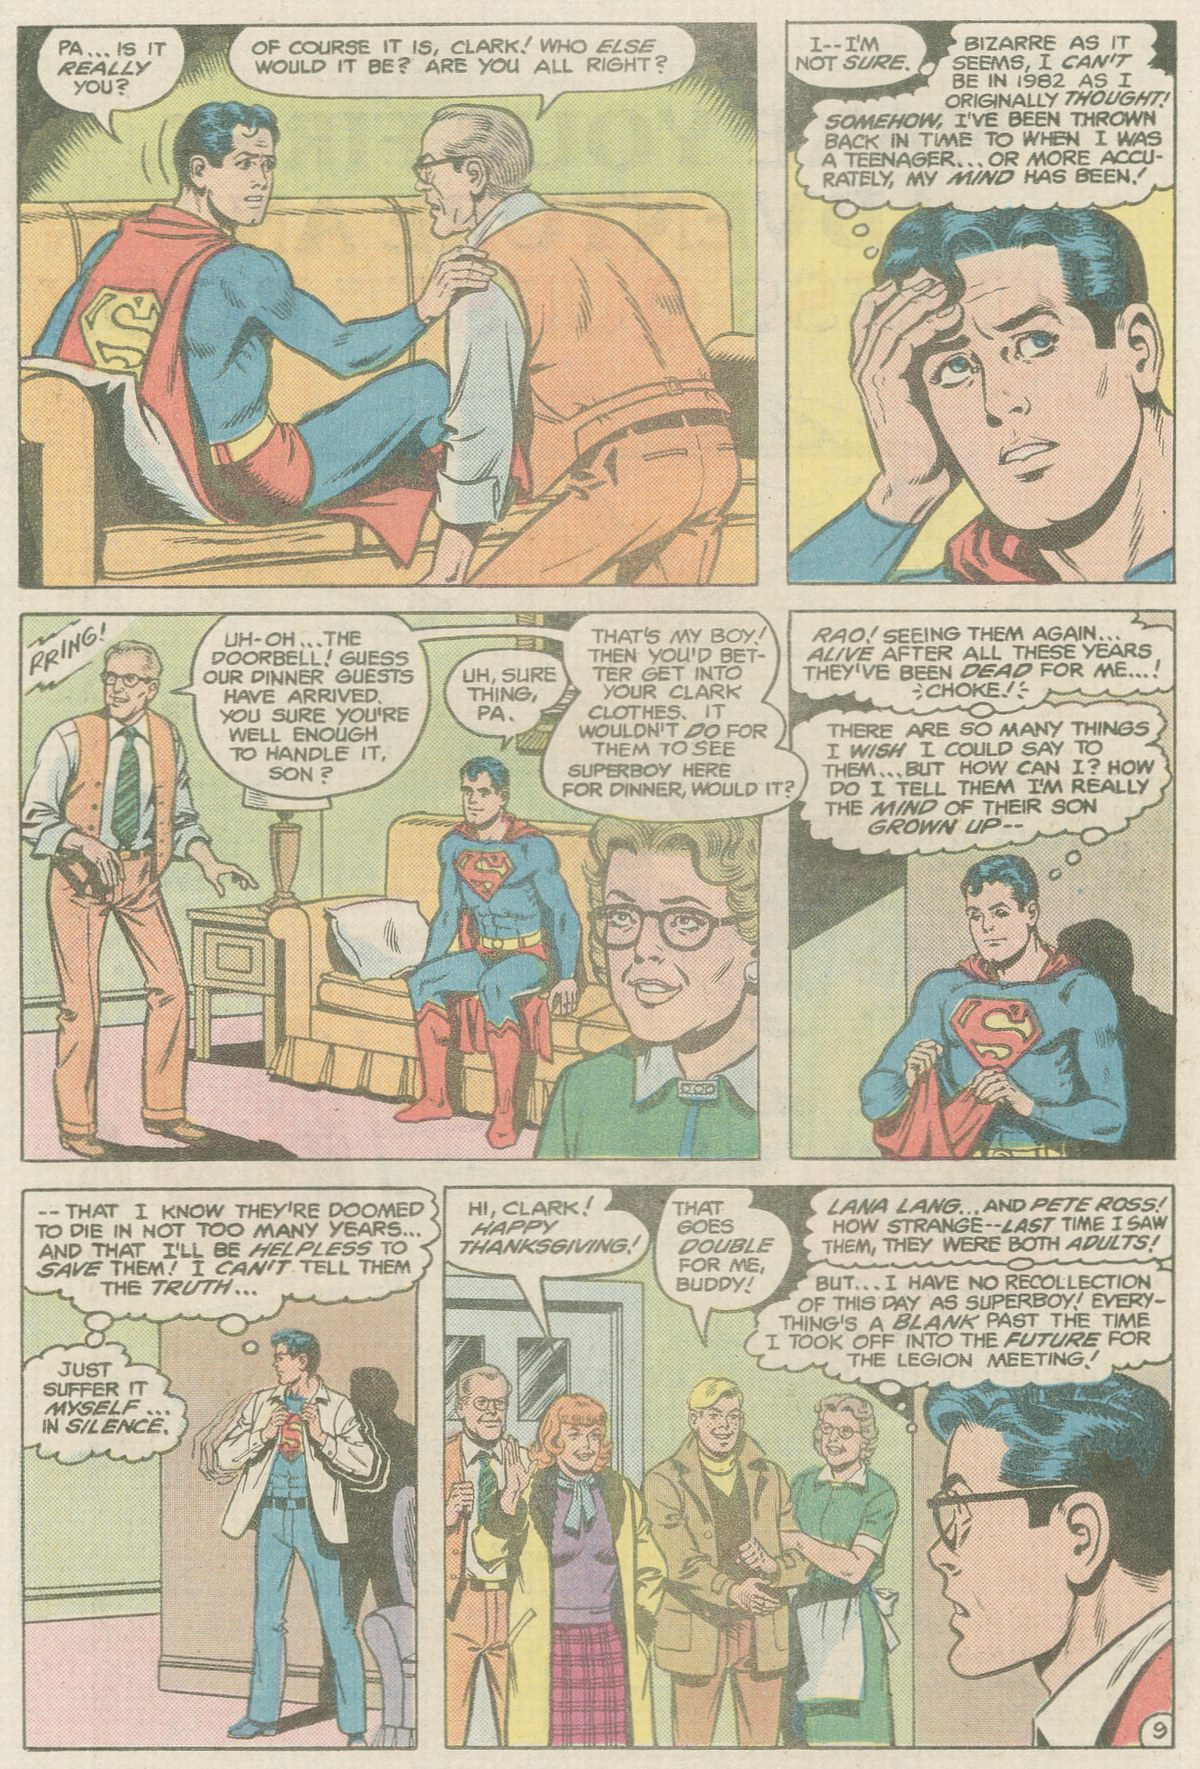 The New Adventures of Superboy 38 Page 9